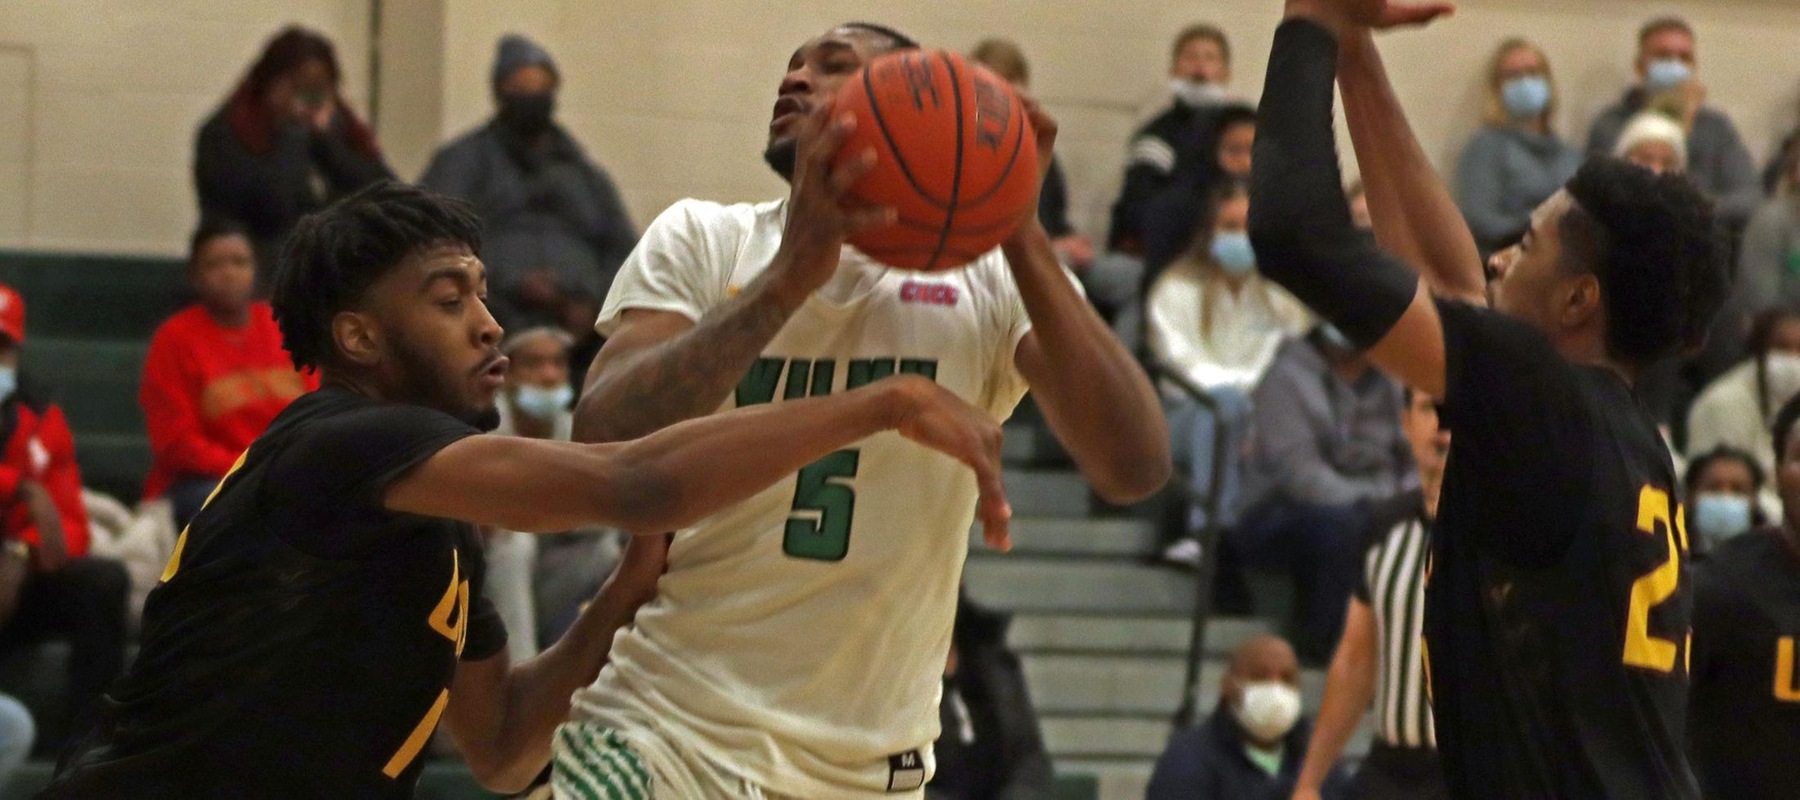 File photo of Randy Rickards who led the Wildcats with 20 points at Bloomsburg. Copyright 2021; Wilmington University. All rights reserved. Photo by Trudy Spence. November 24, 2021 vs. UDC.